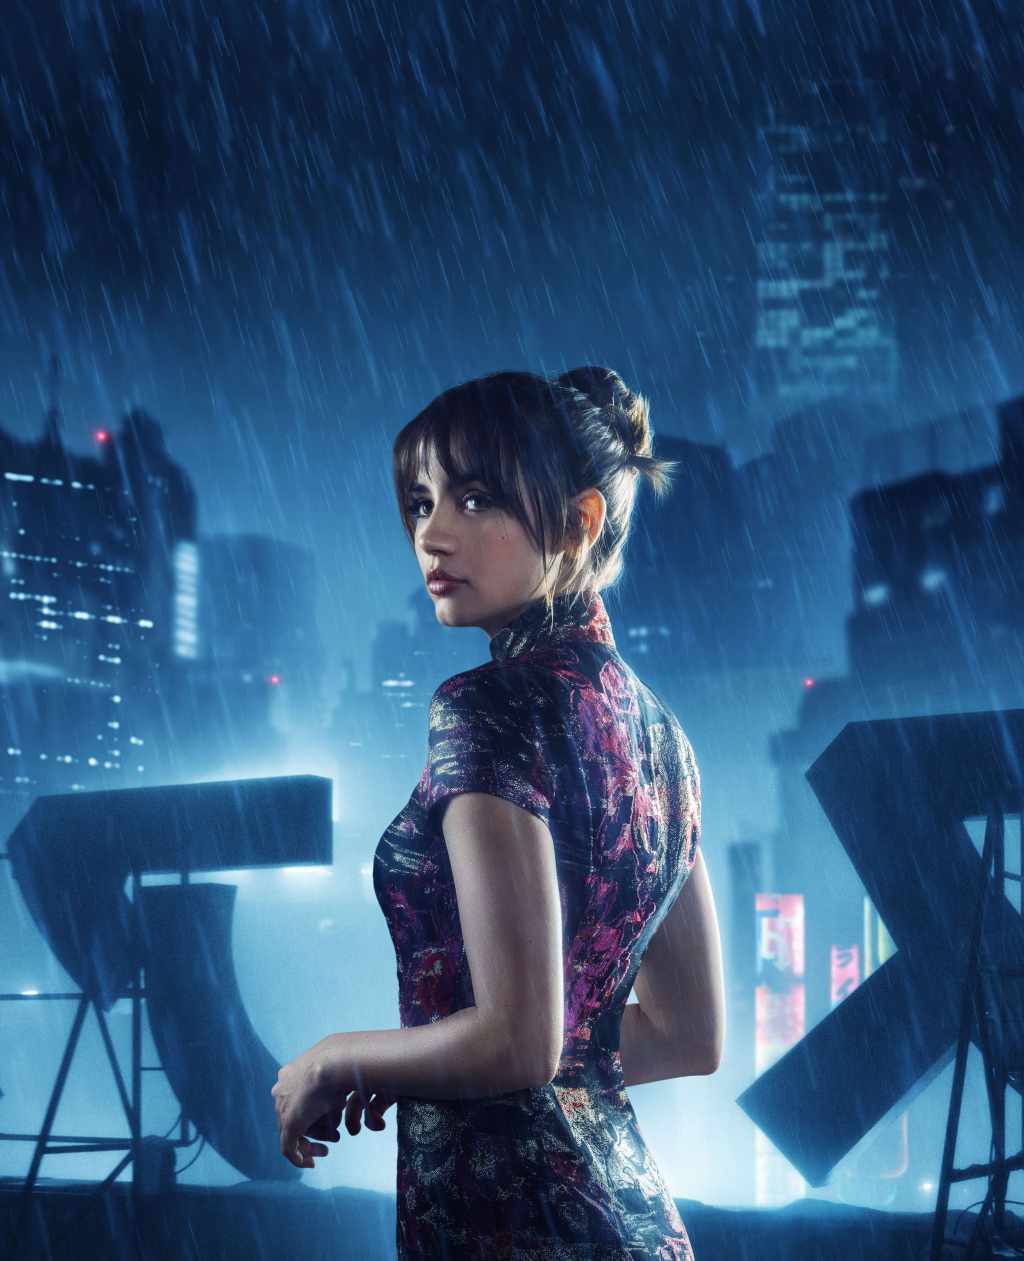 Download wallpaper 840x1160 ana de armas joi blade runner 2049 actress  movie iphone 4 iphone 4s ipod touch 840x1160 hd background 467